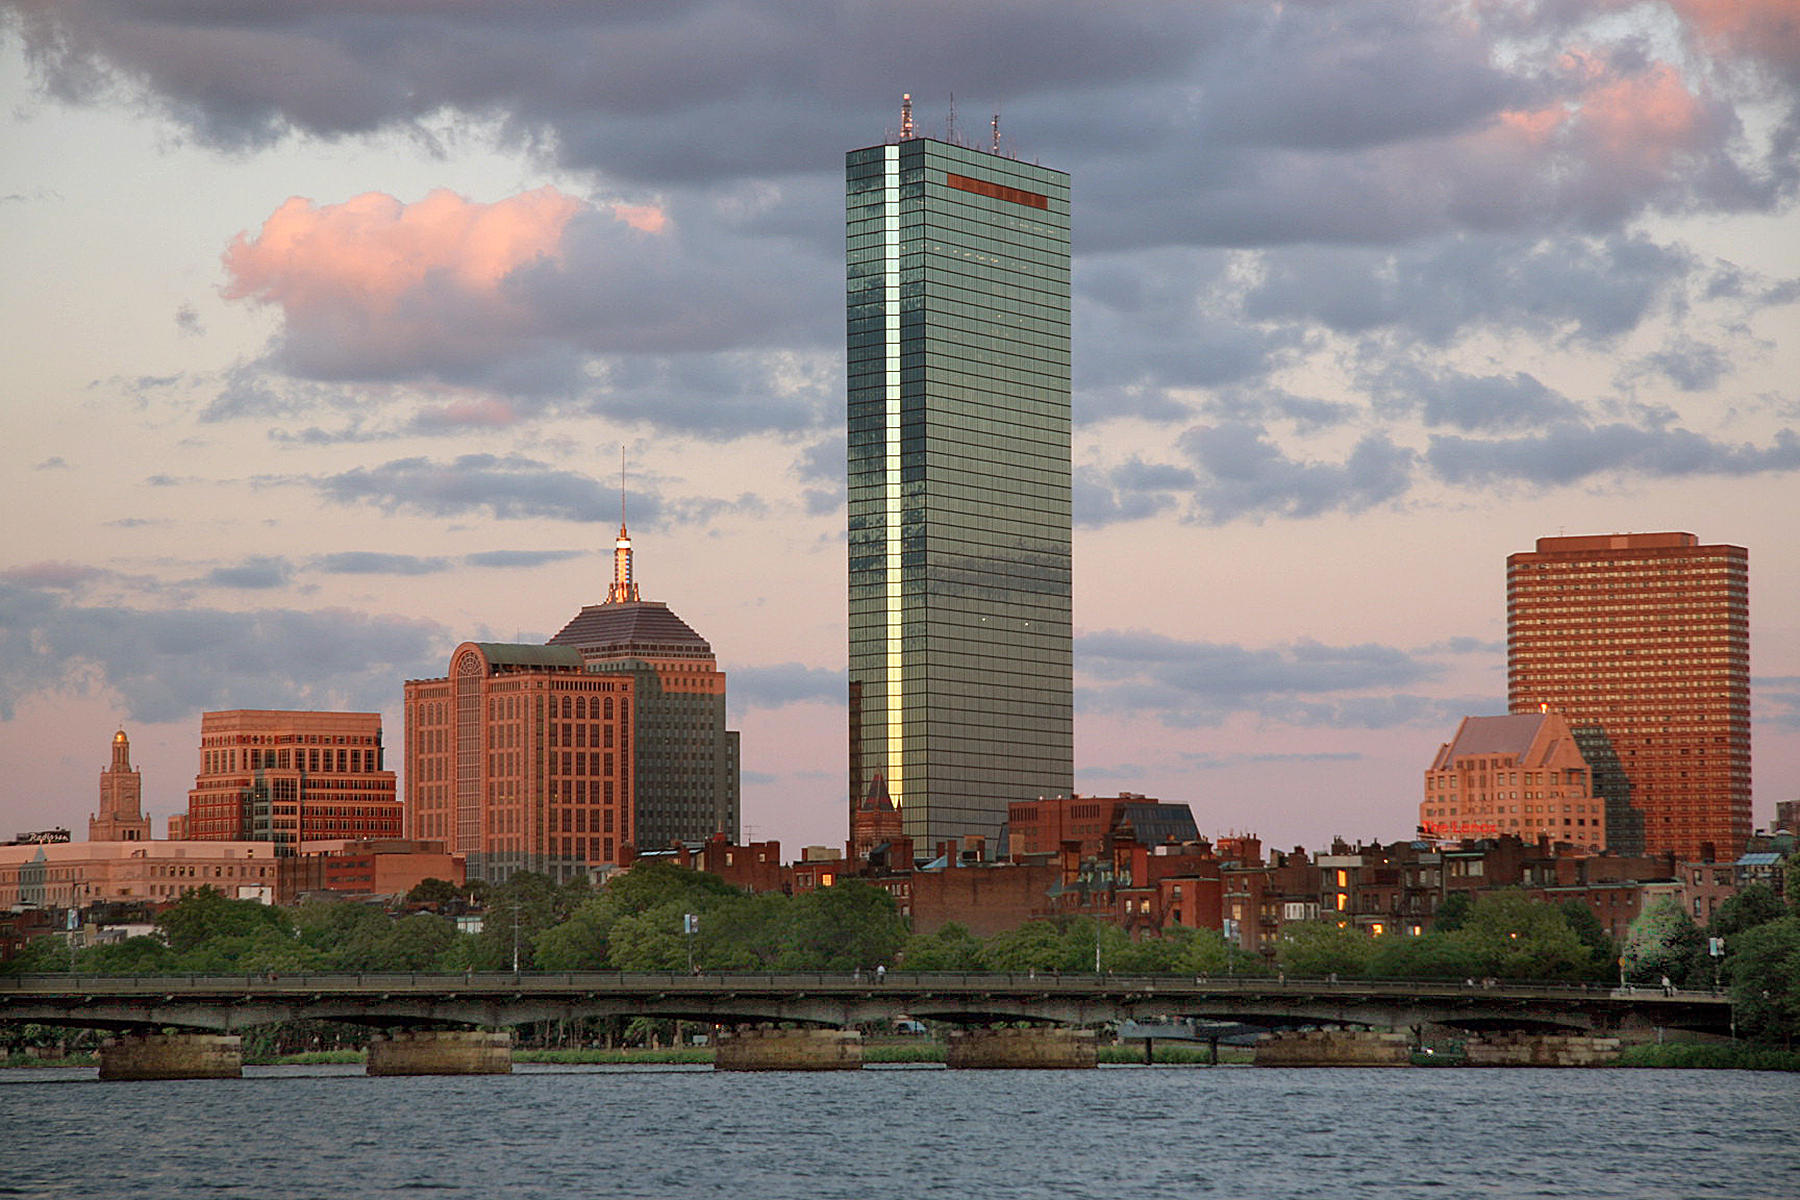 Harvard Bridge, I.M. Pei's Hancock Tower and Boston Skyline from Charles River<p><a class="nav-link" href="/content.html?page=6/#TA6" target="_top">Thumbnail</a>